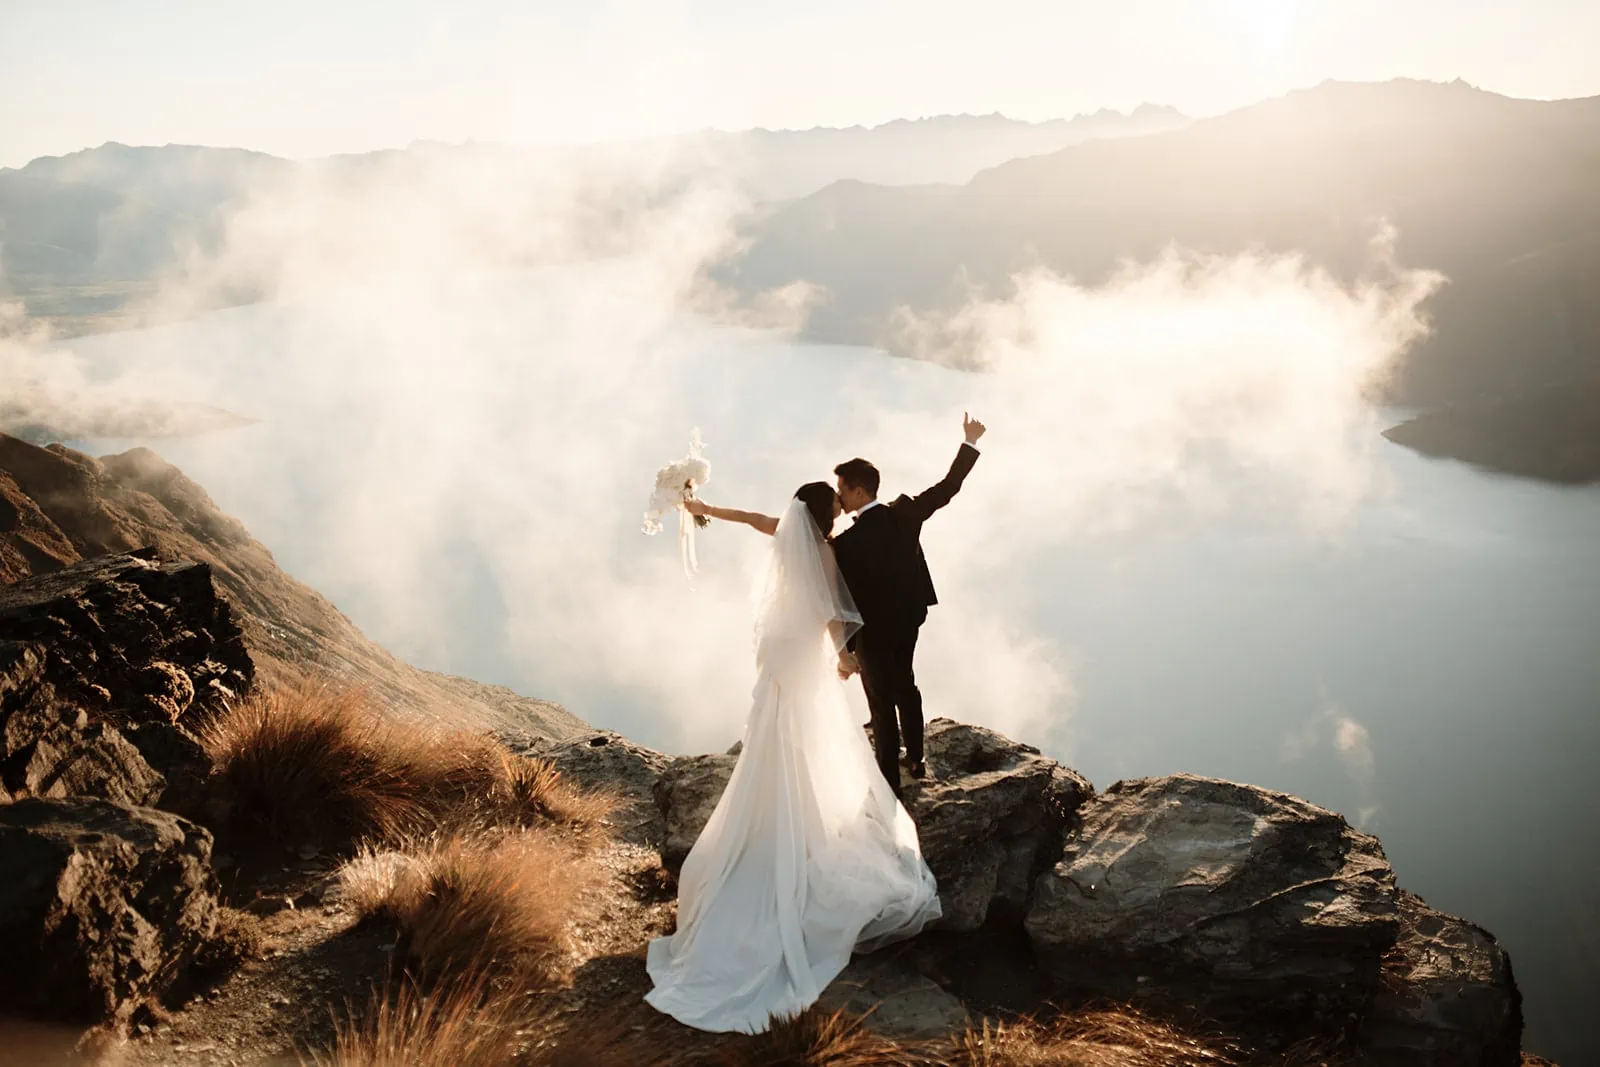 Queenstown New Zealand Elopement Wedding Photographer - The Ultimate Queenstown Elopement Wedding Guide featuring a bride and groom atop a mountain, overlooking the clouds and lake at sunset